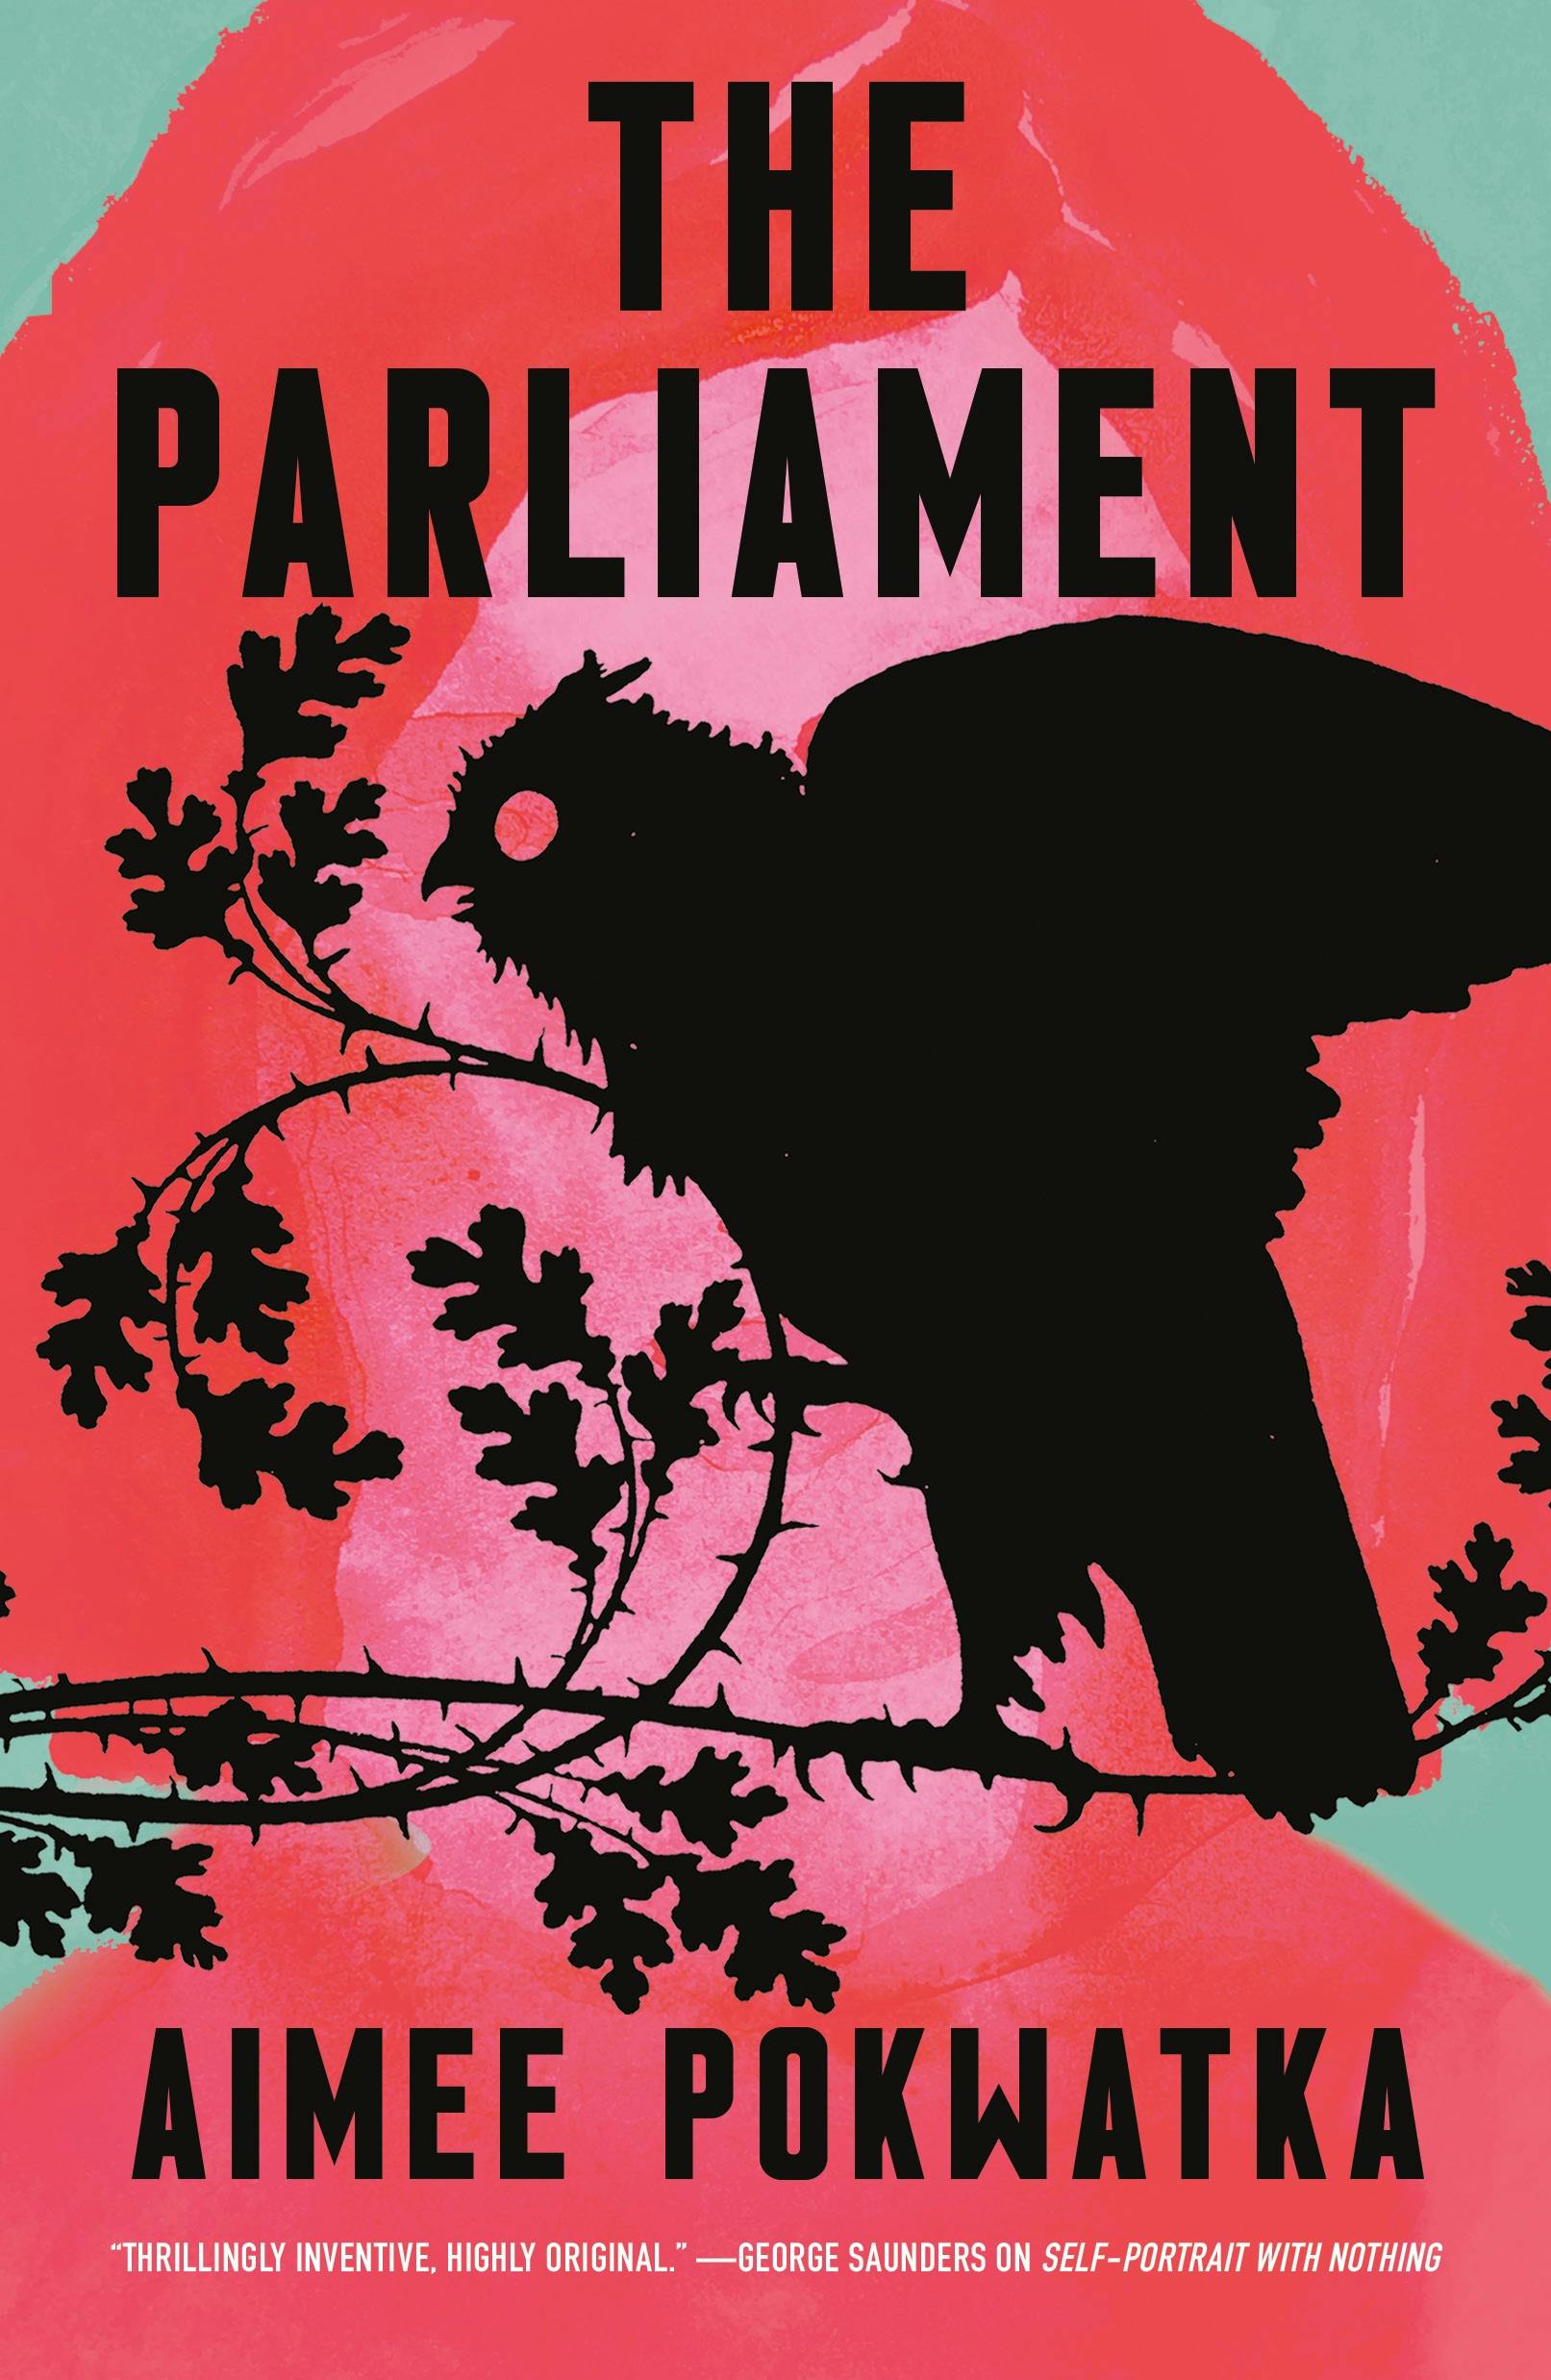 Cover for the book titled as: The Parliament